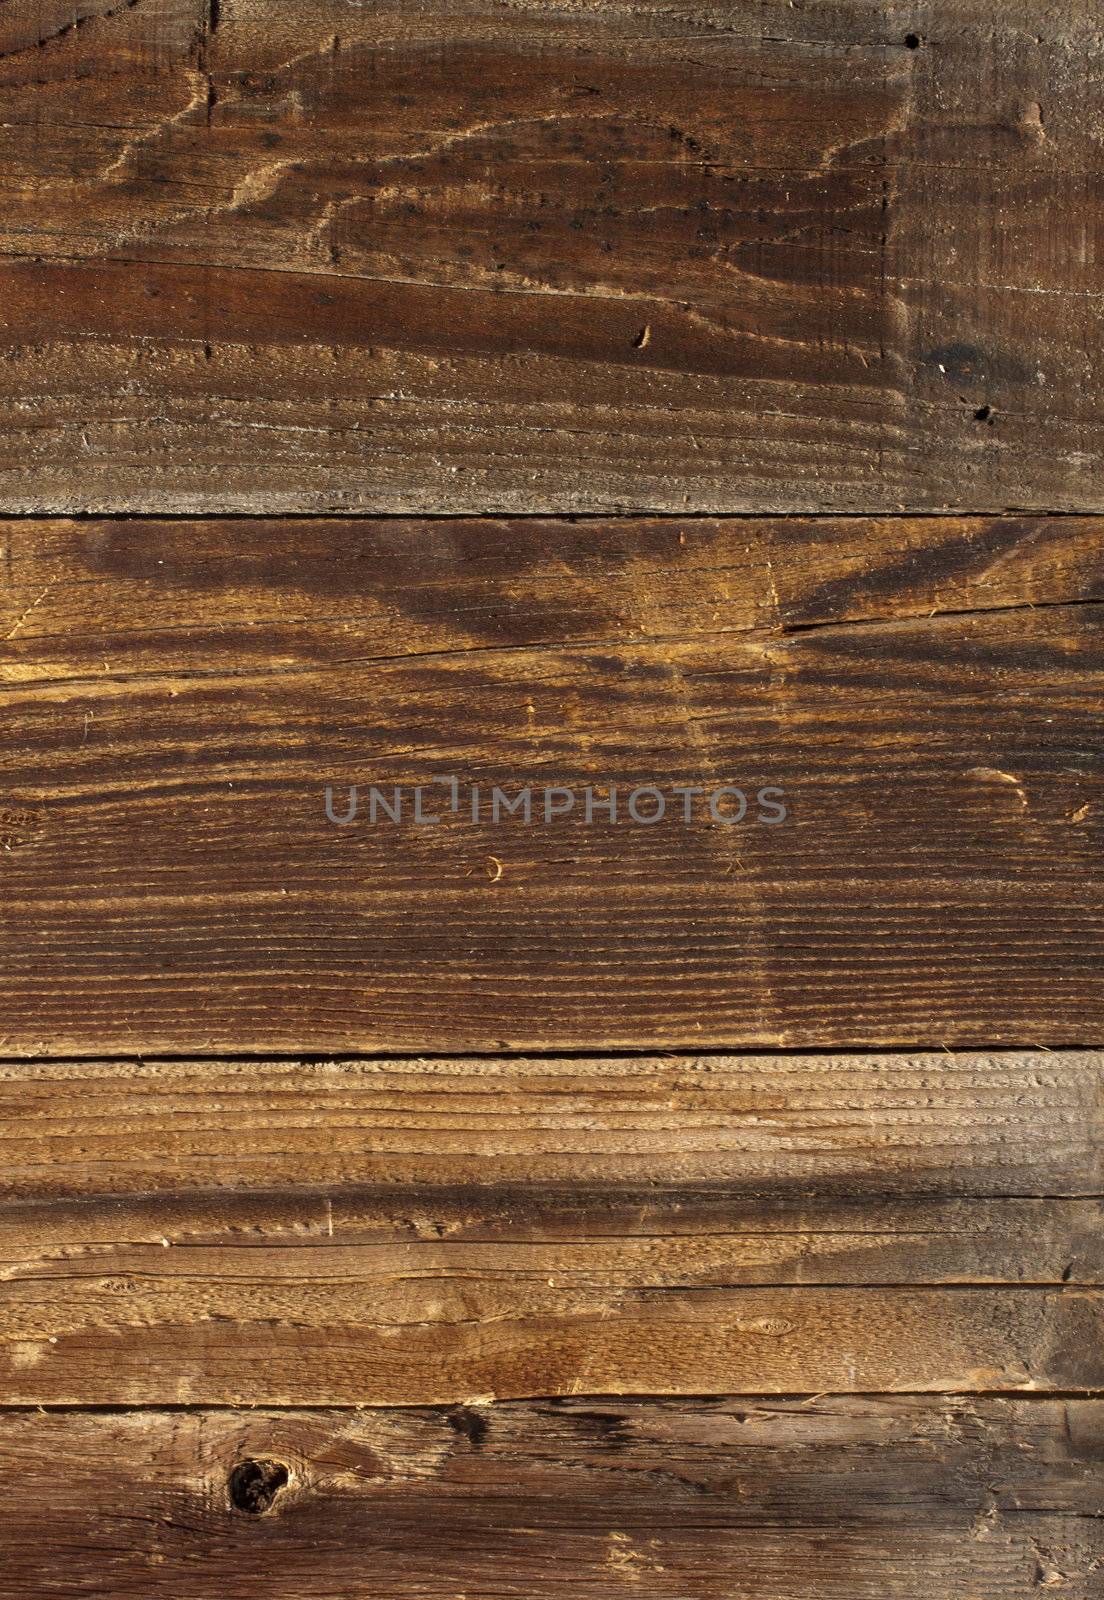 Grunge wood texture by jeremywhat